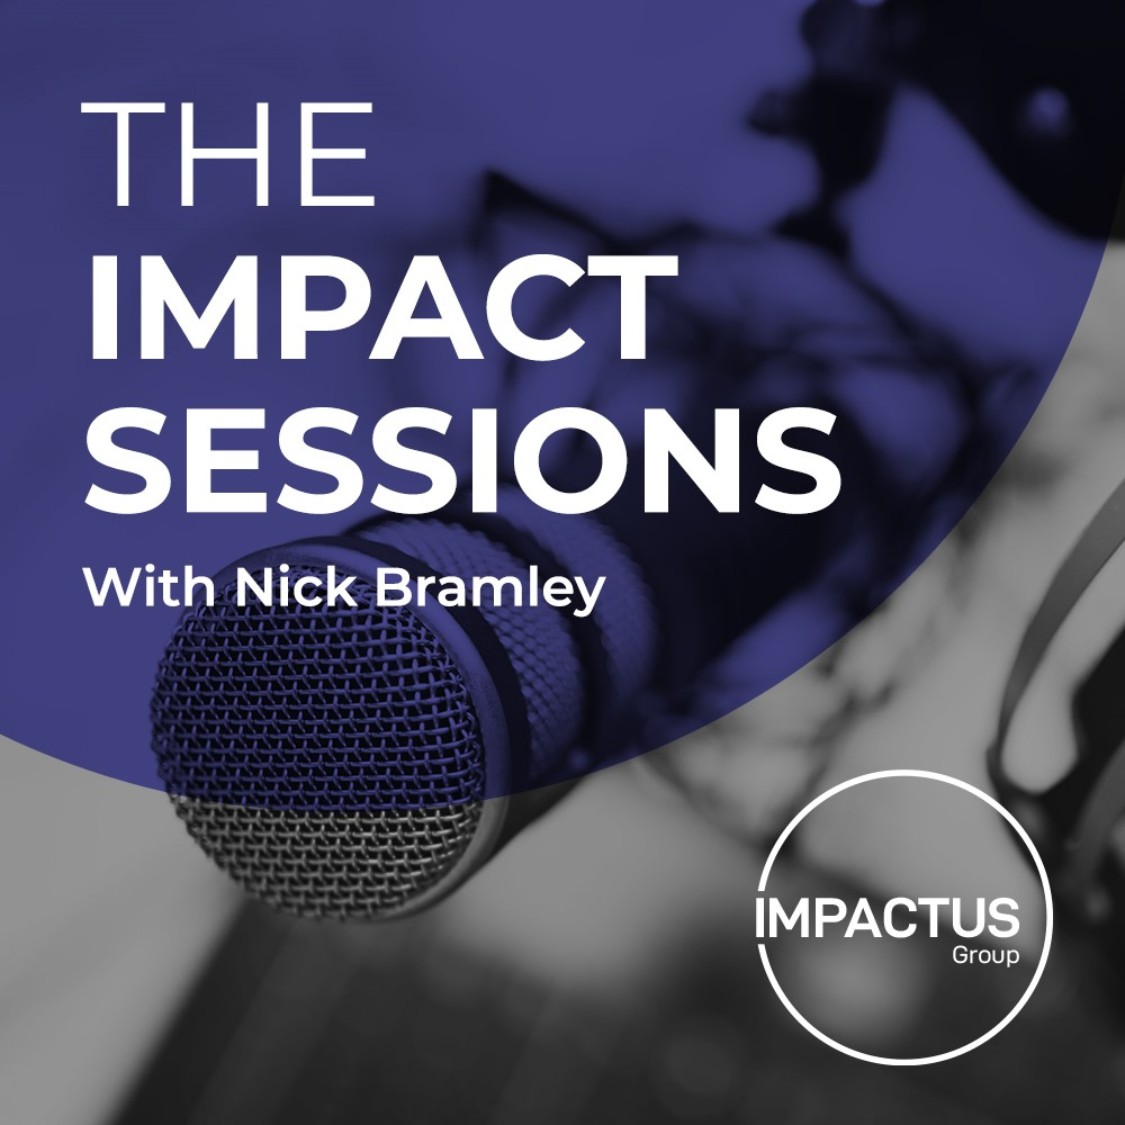 The Impact Sessions 53 - Building a Growing, Successful Business in a Pandemic